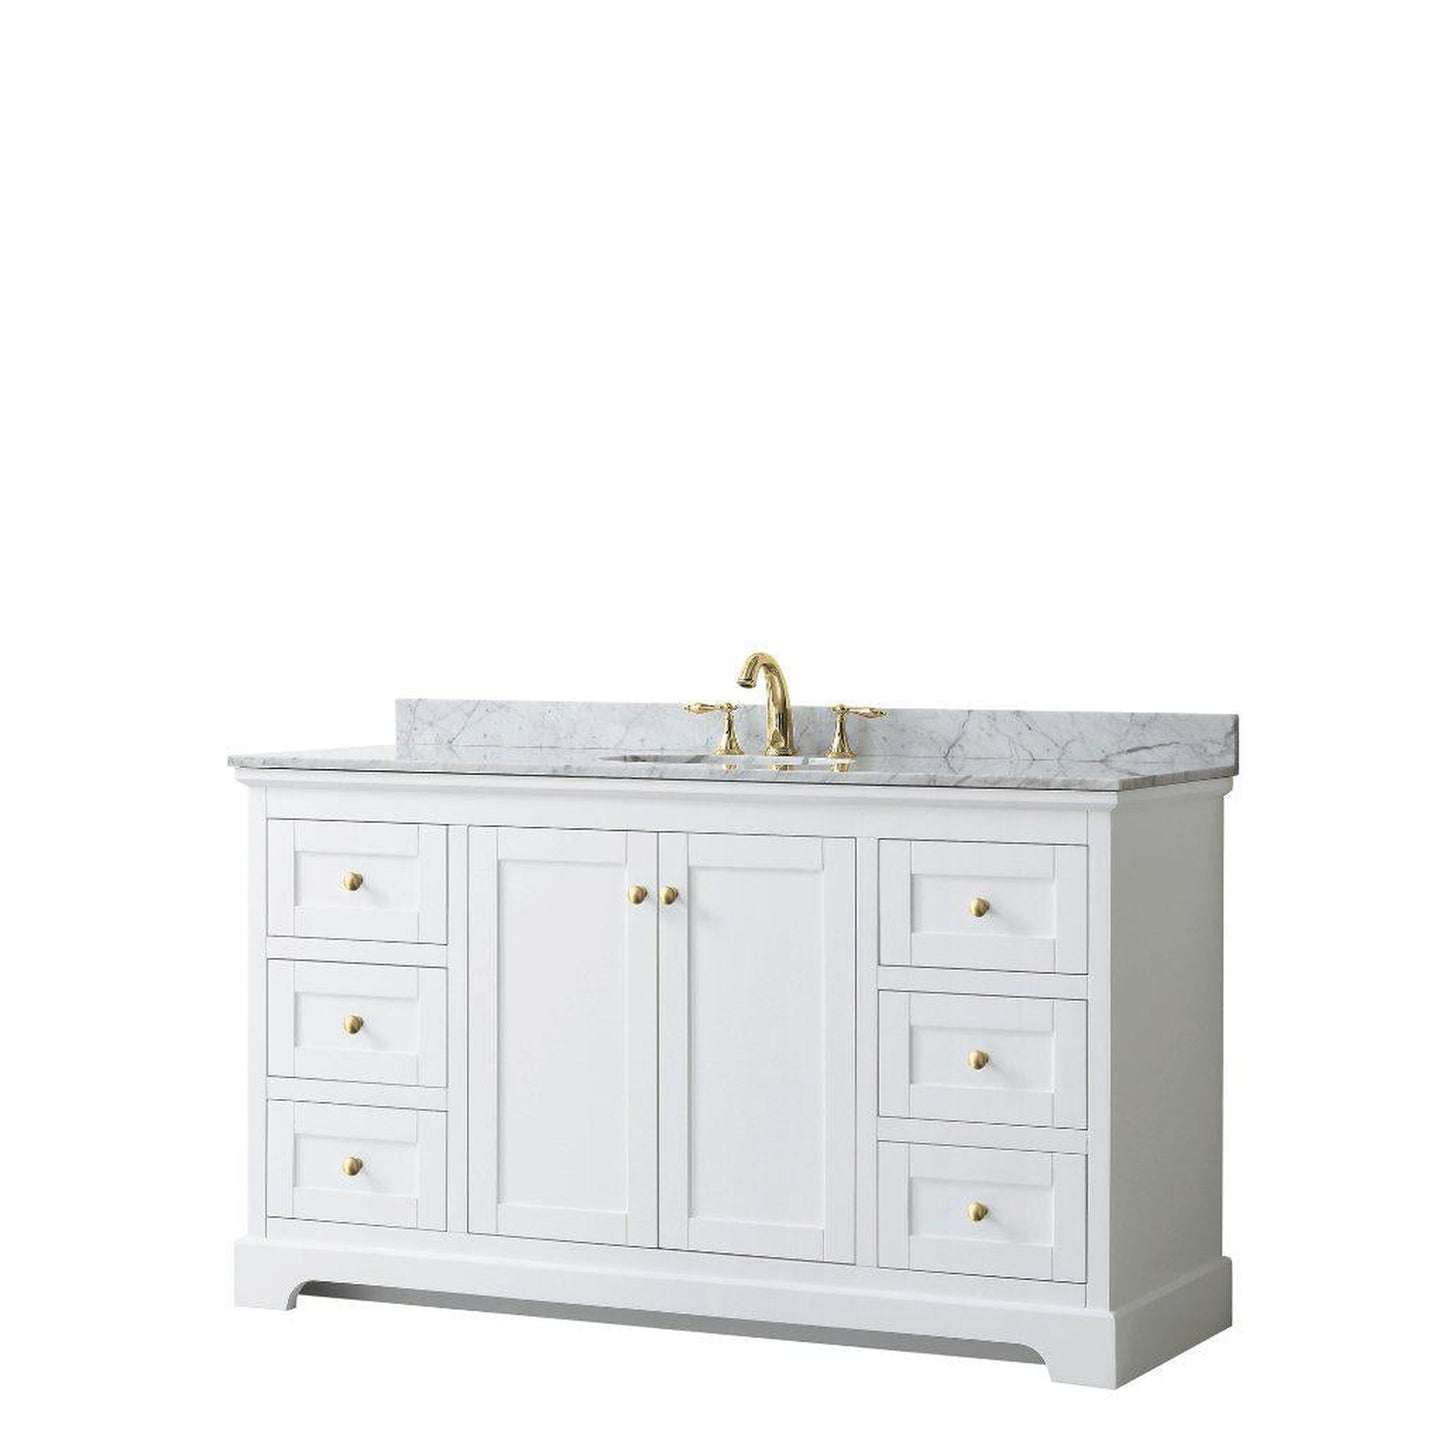 Wyndham Collection Avery 60" White Single Bathroom Vanity, White Carrara Marble Countertop With 3-Hole Faucet, 8" Oval Sink, Gold Trims